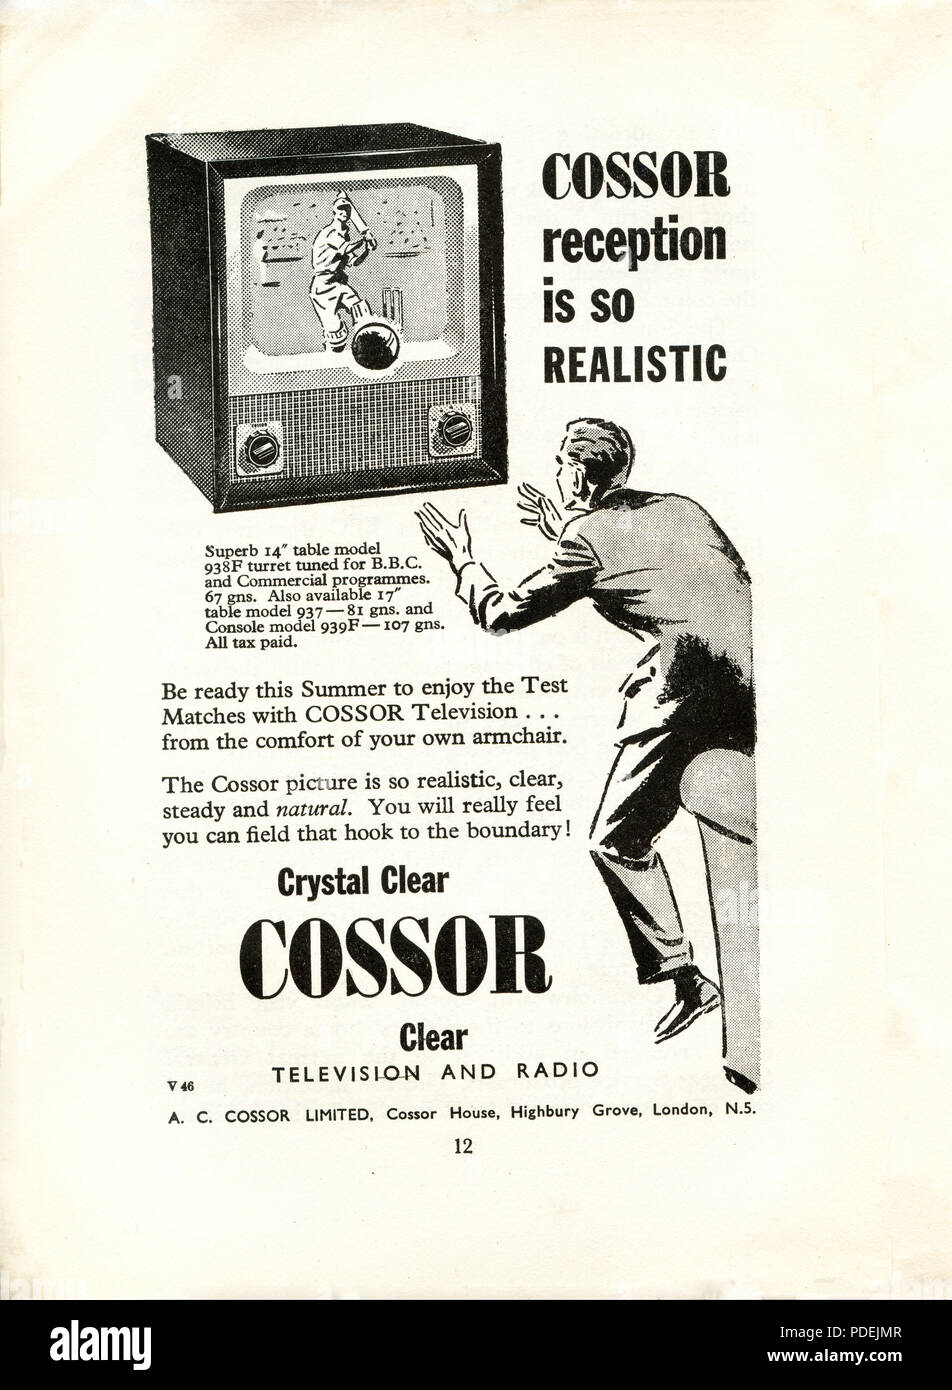 1947, an advert in a UK cricket brochure for British made Cossor television sets saying that the picture (reception) is so realistic.....'you can field that hook to the boundary'... Stock Photo